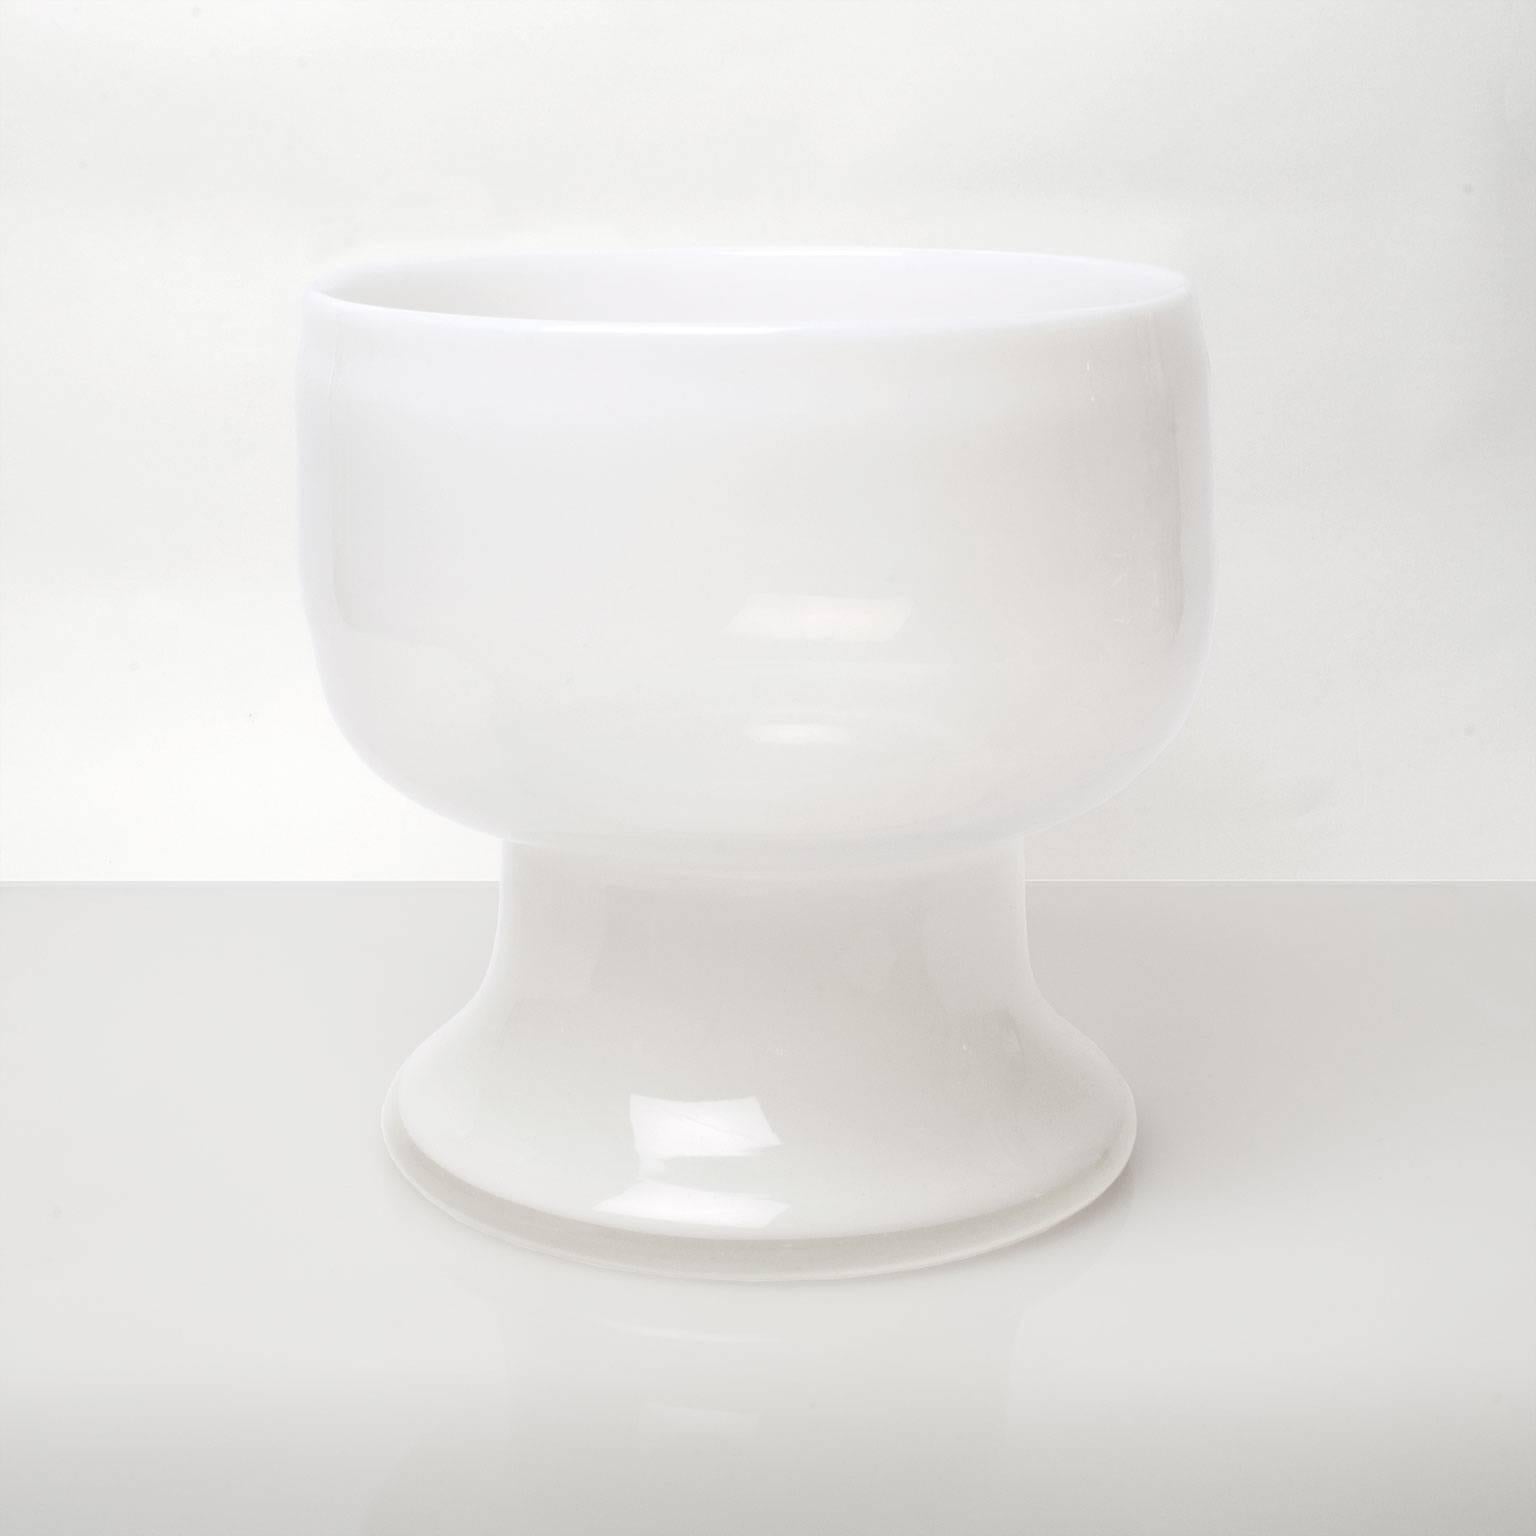 Large scale Scandinavian Modern opalescent glass footed vase by Erik Hoglund for Boda, Sweden. Height: 10.5